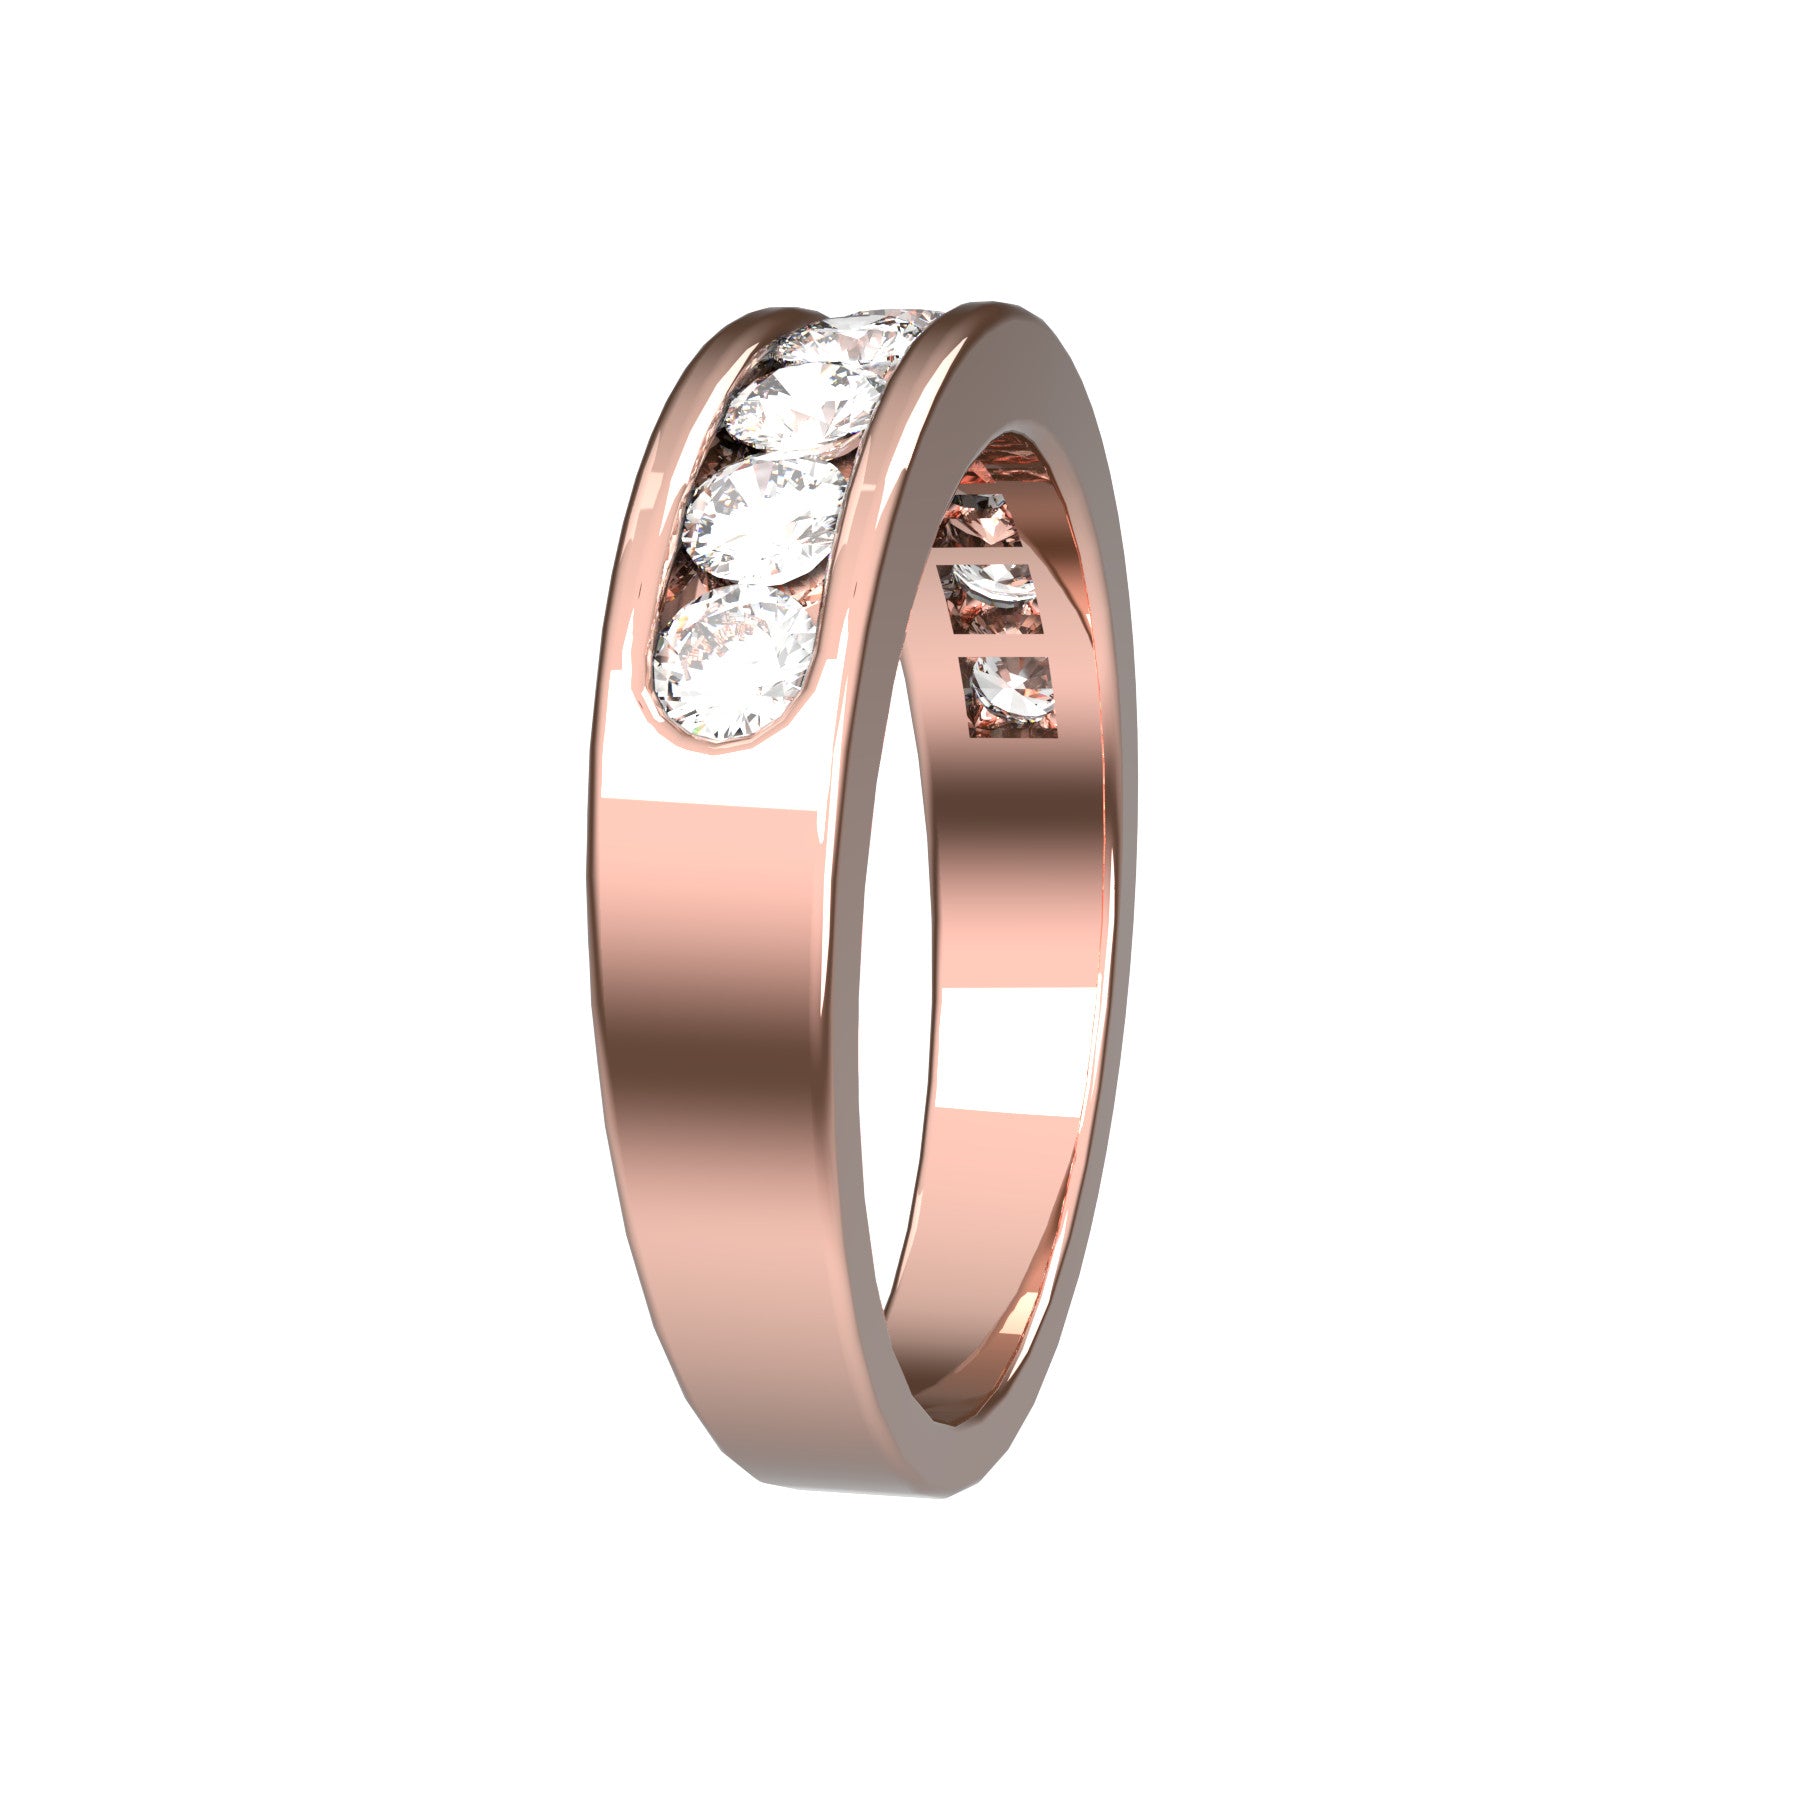 perpetual half wedding ring, 18 K pink gold, 0,07 ct round natural diamond, weight about 4,5 g. (0.16 oz), width 4,70 mm